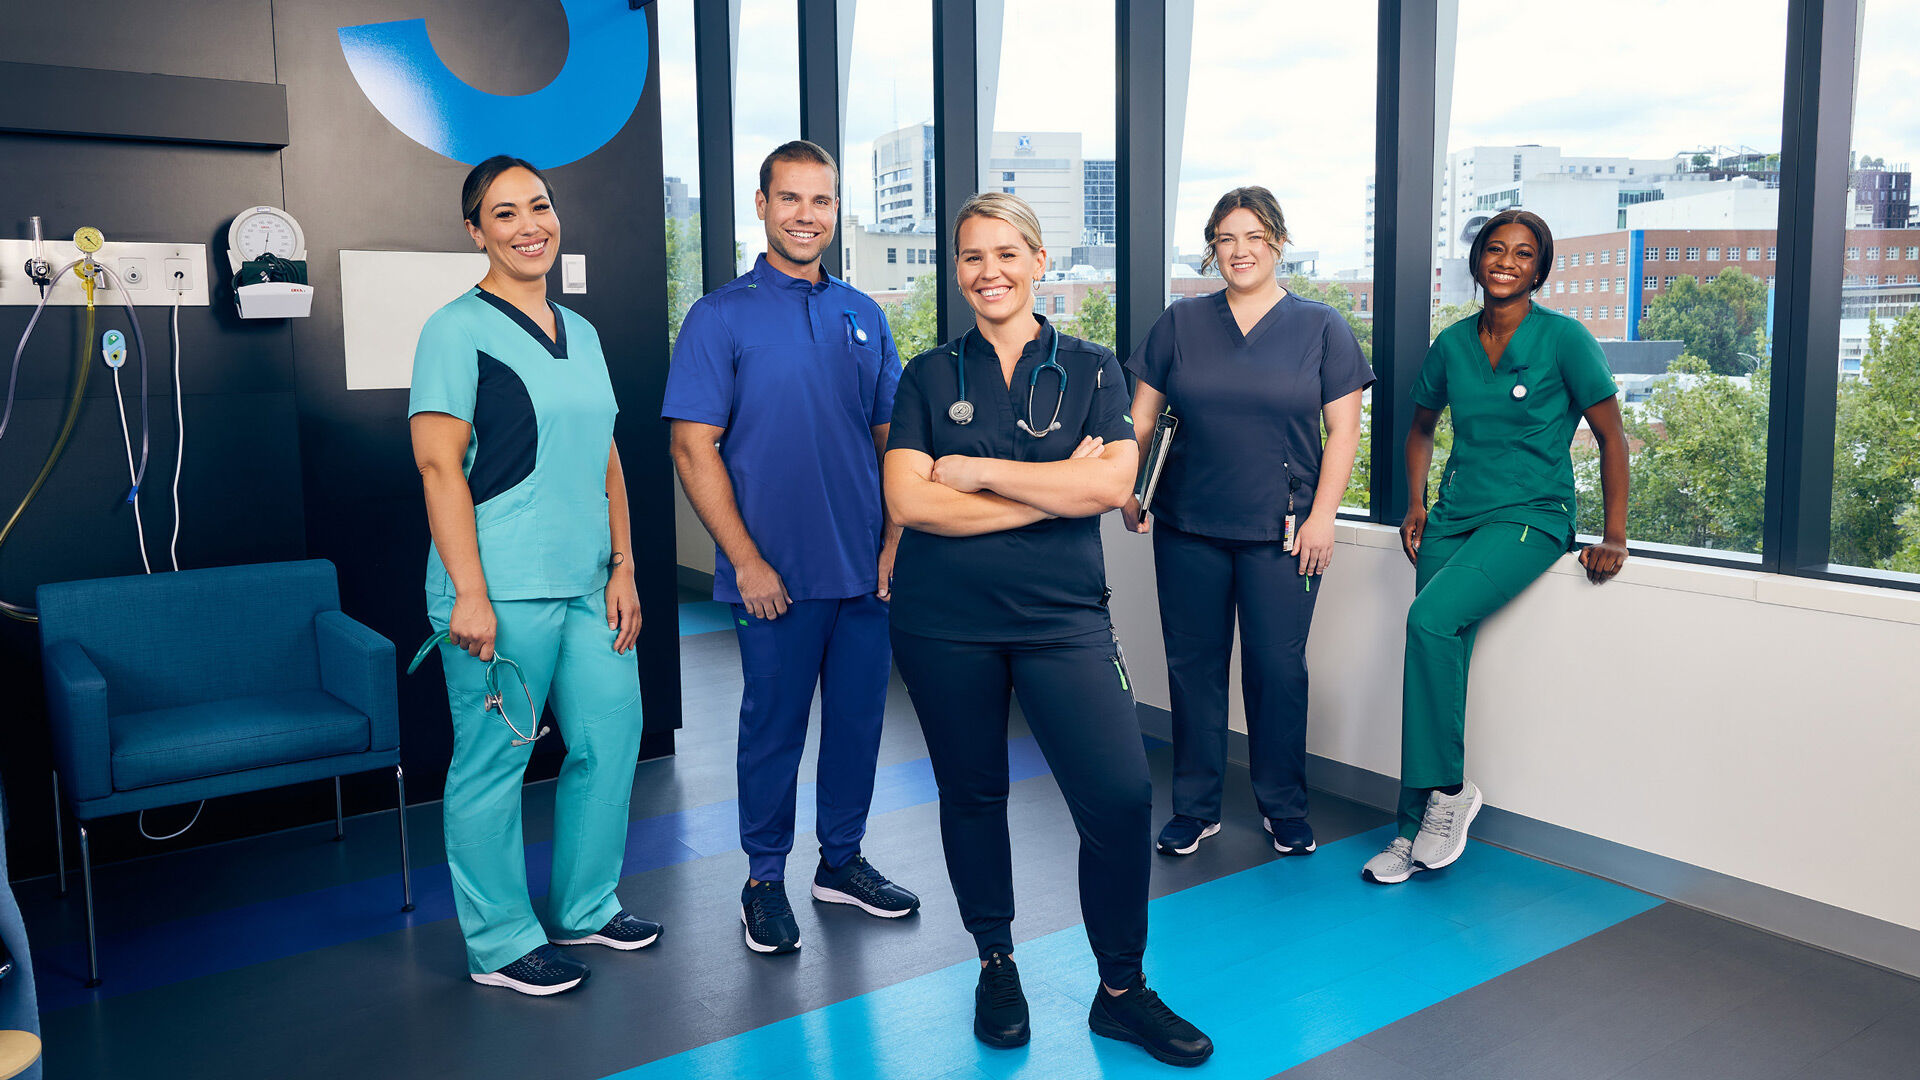 Meet the Healthcare professionals